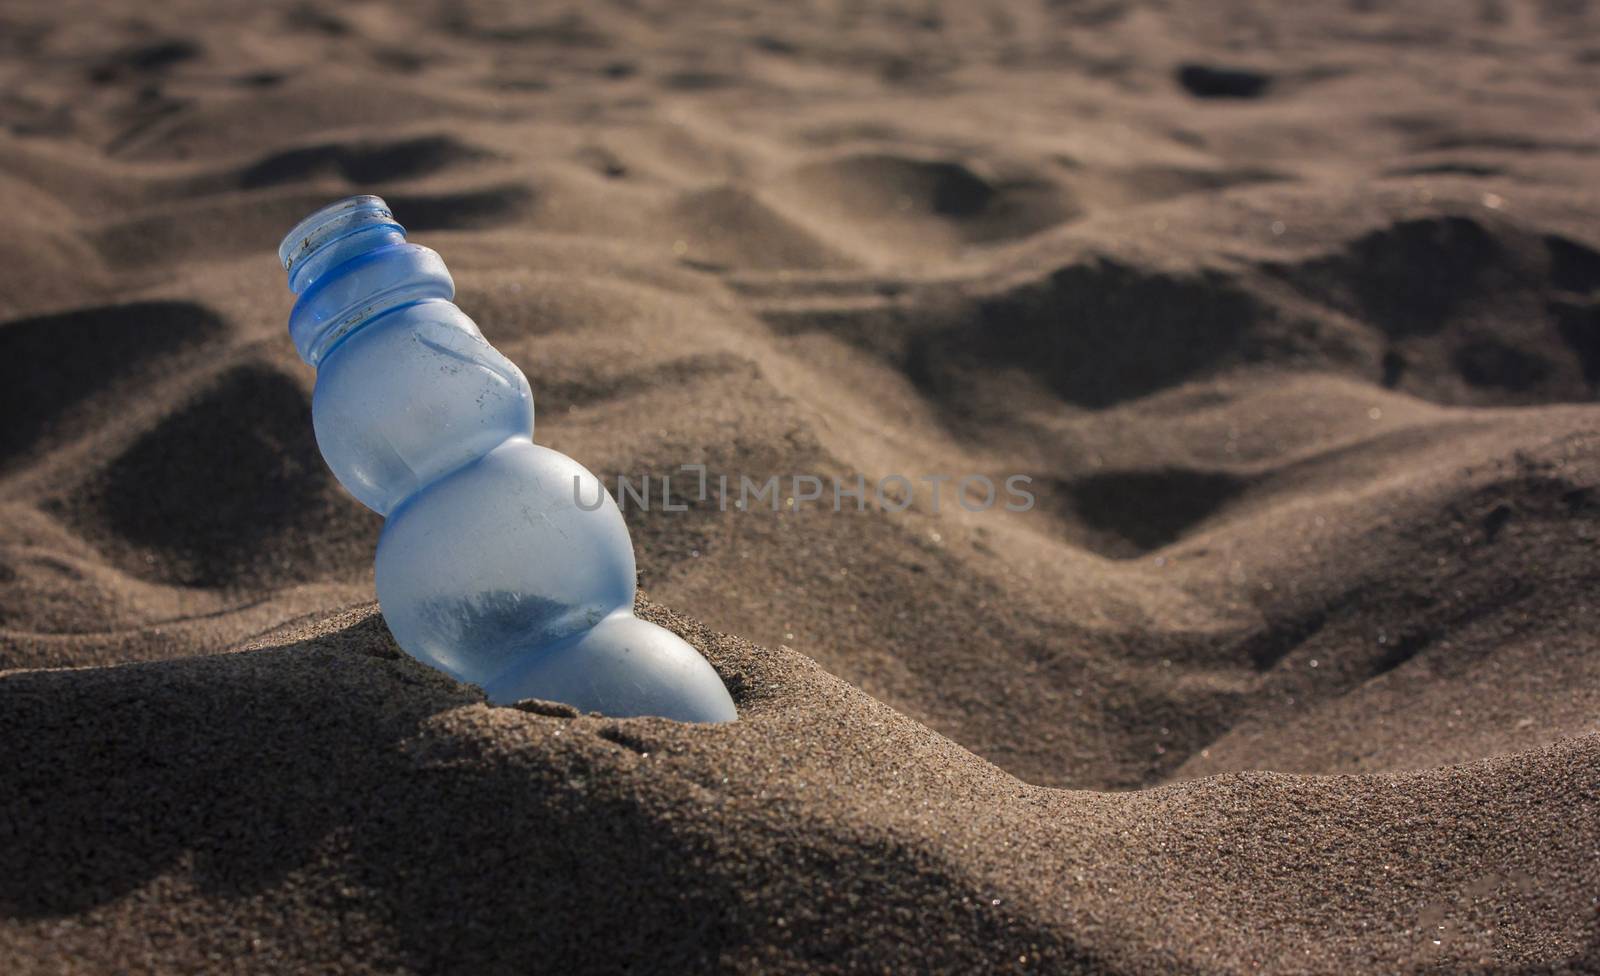 Pollution: a stranded Plastic waste on the sand of a beautiful Italian beach